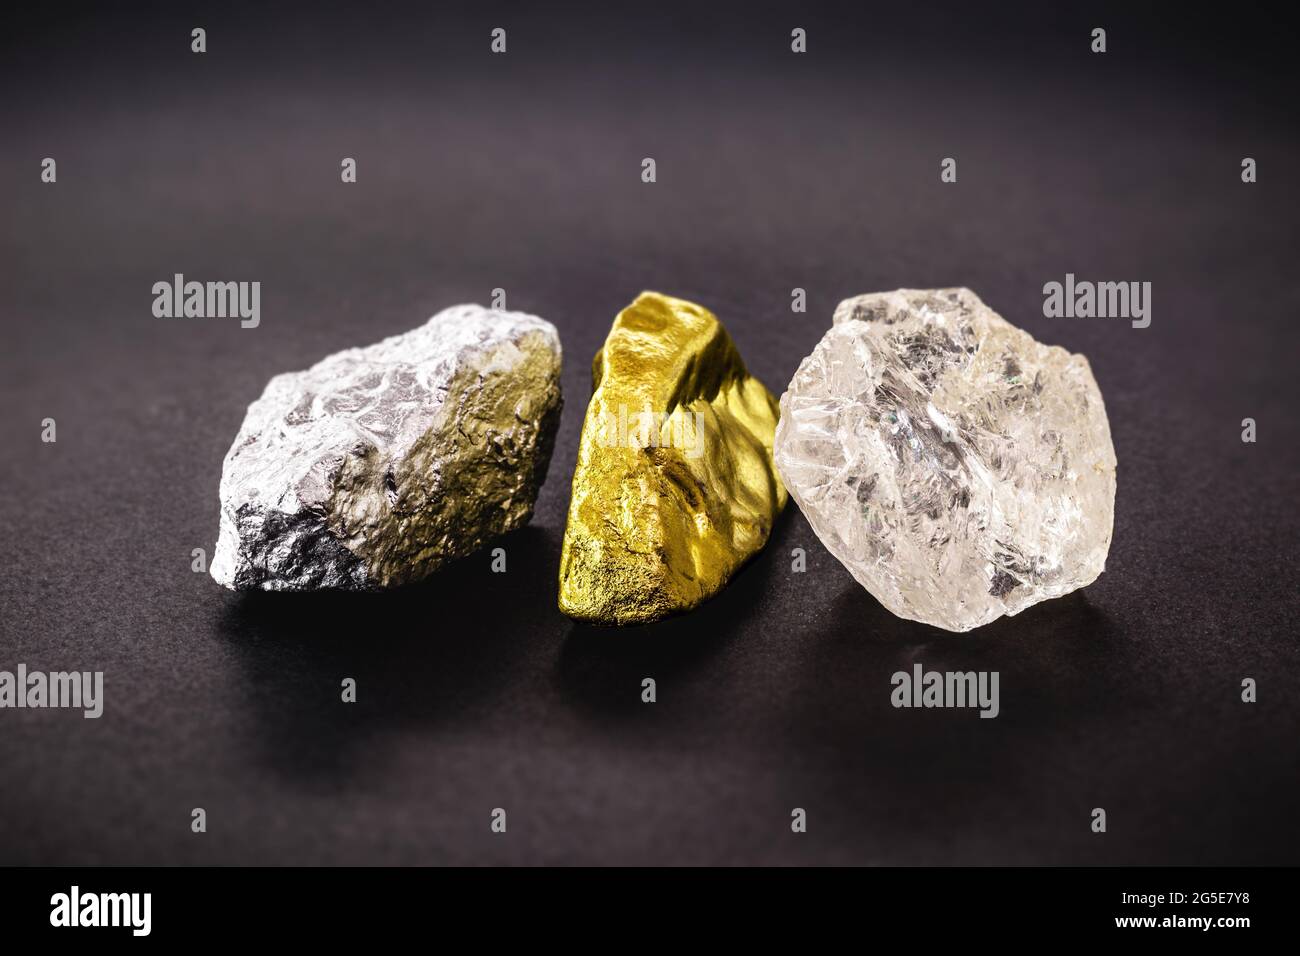 rough diamond stone with rough nuggets of gold and silver, concept of gemstones and minerology Stock Photo